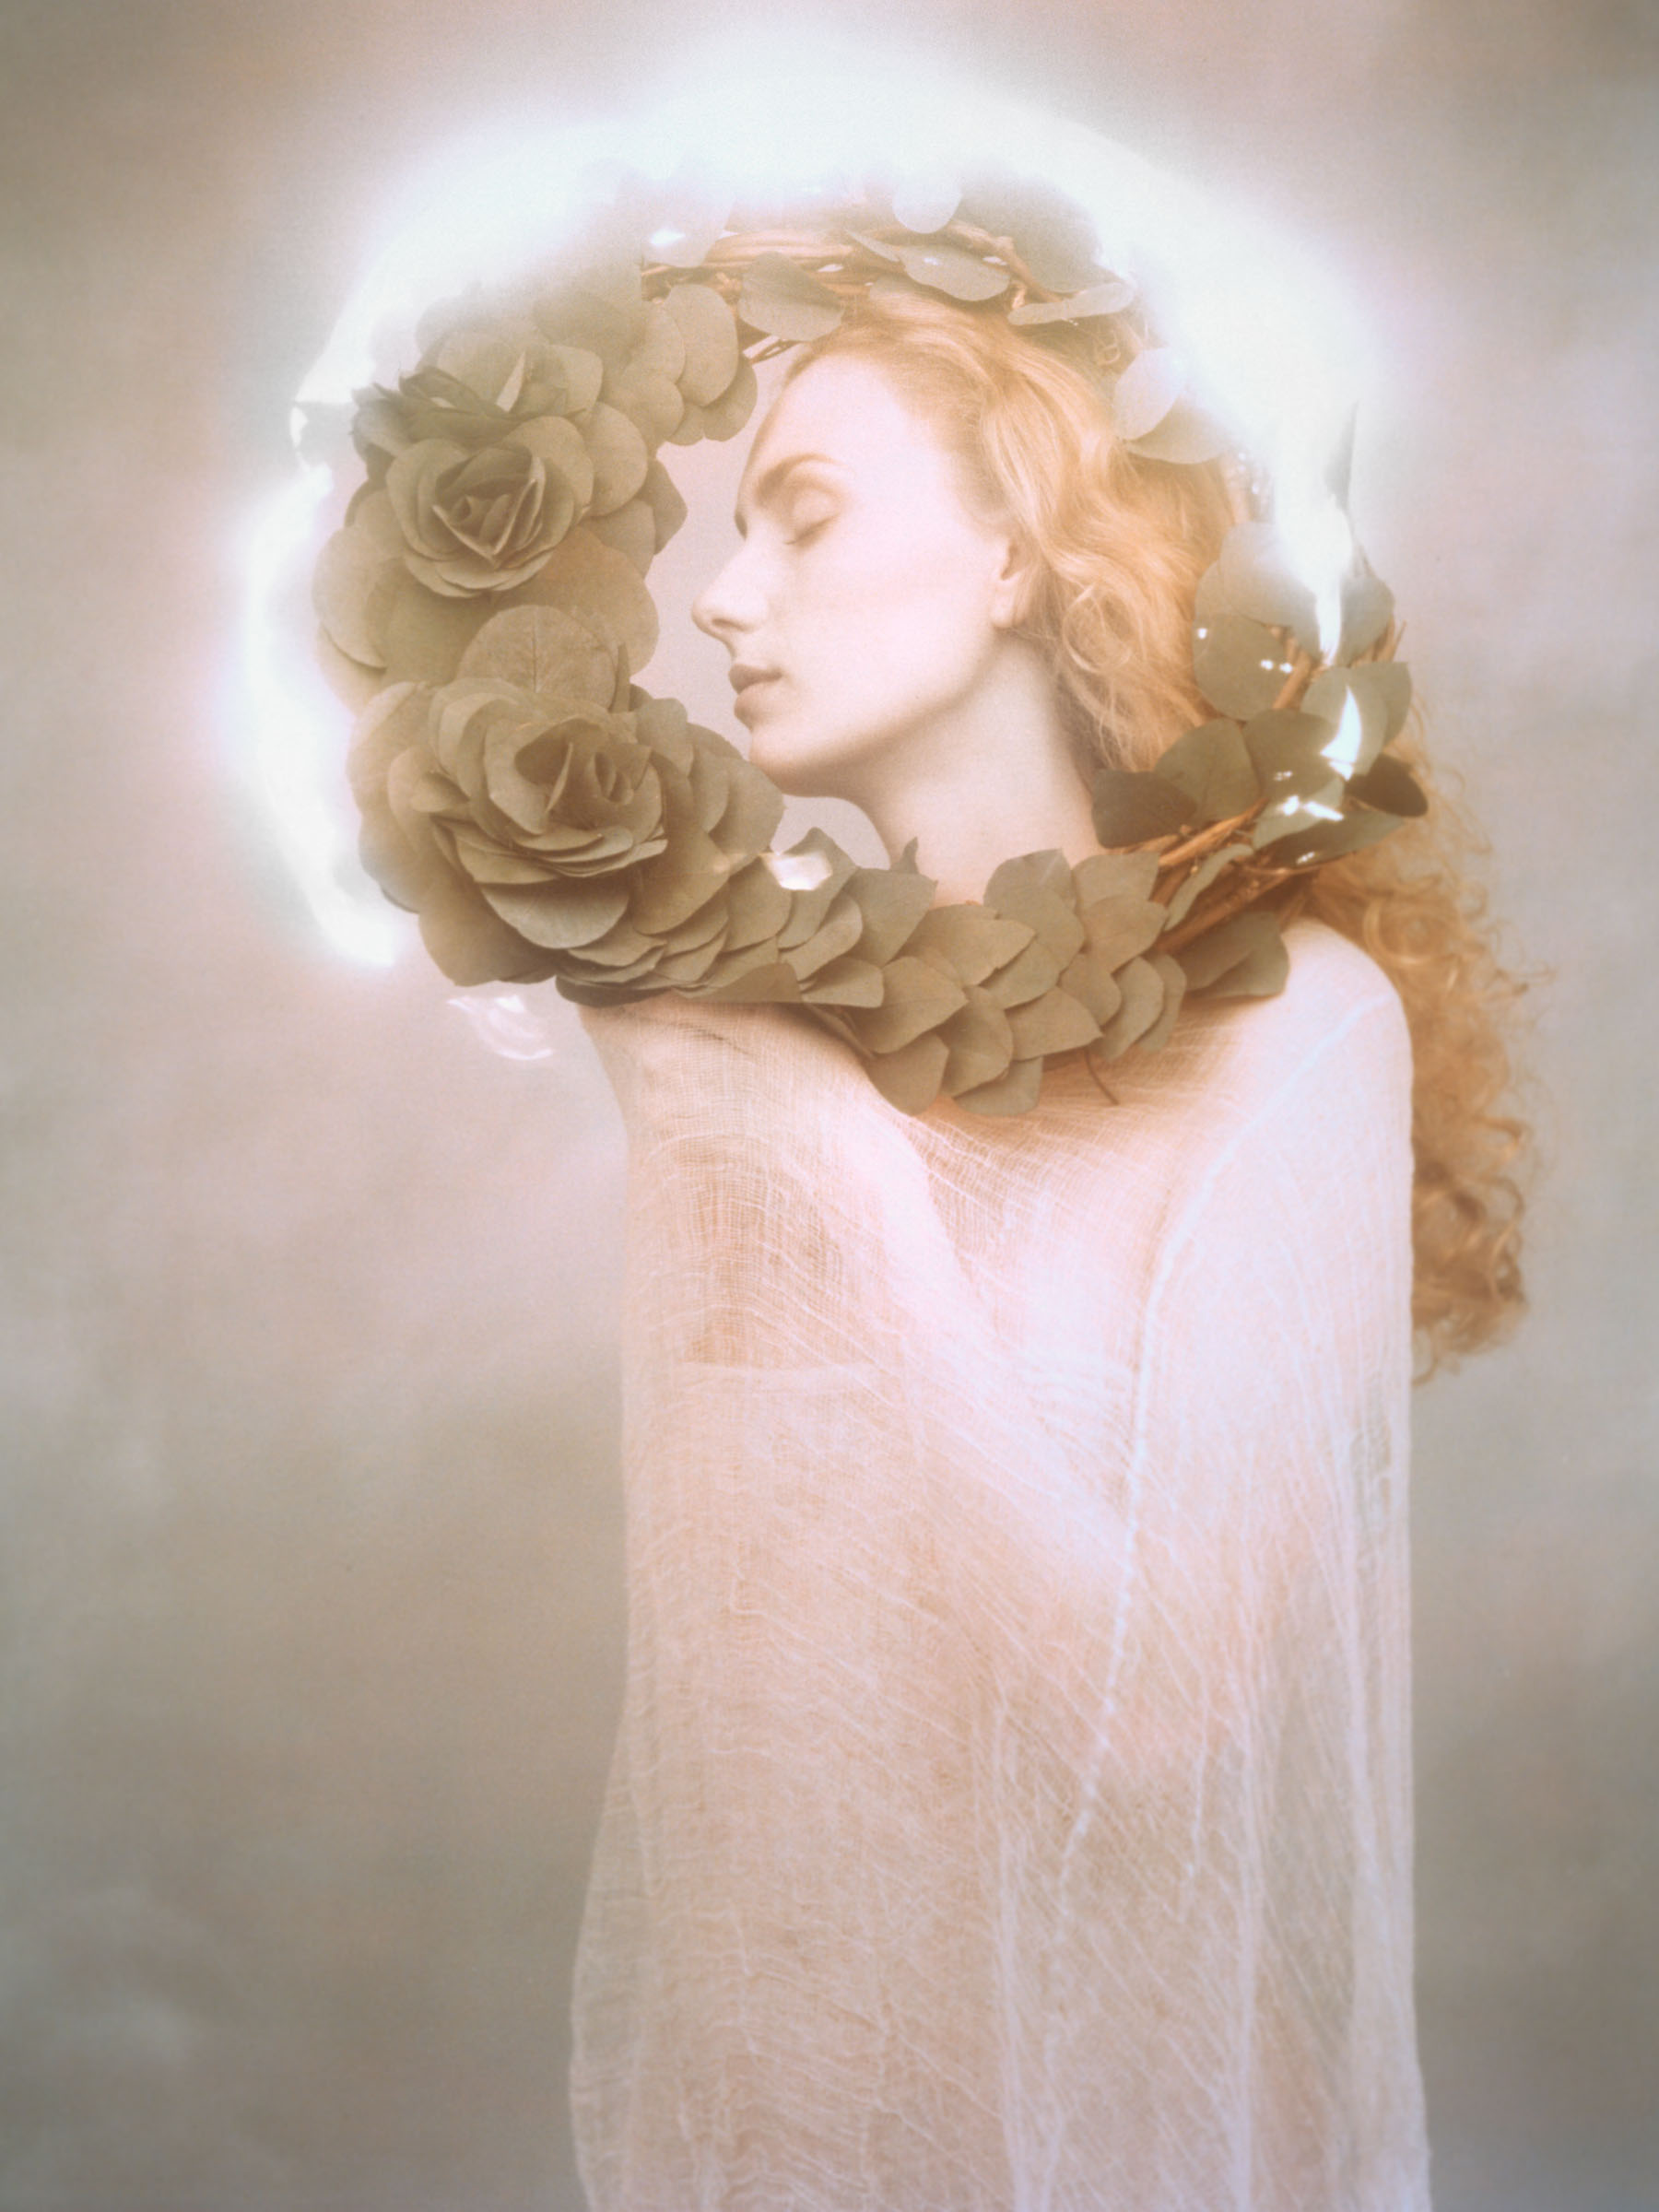 06_suzanne_with_wreath30x40_ed-ap_